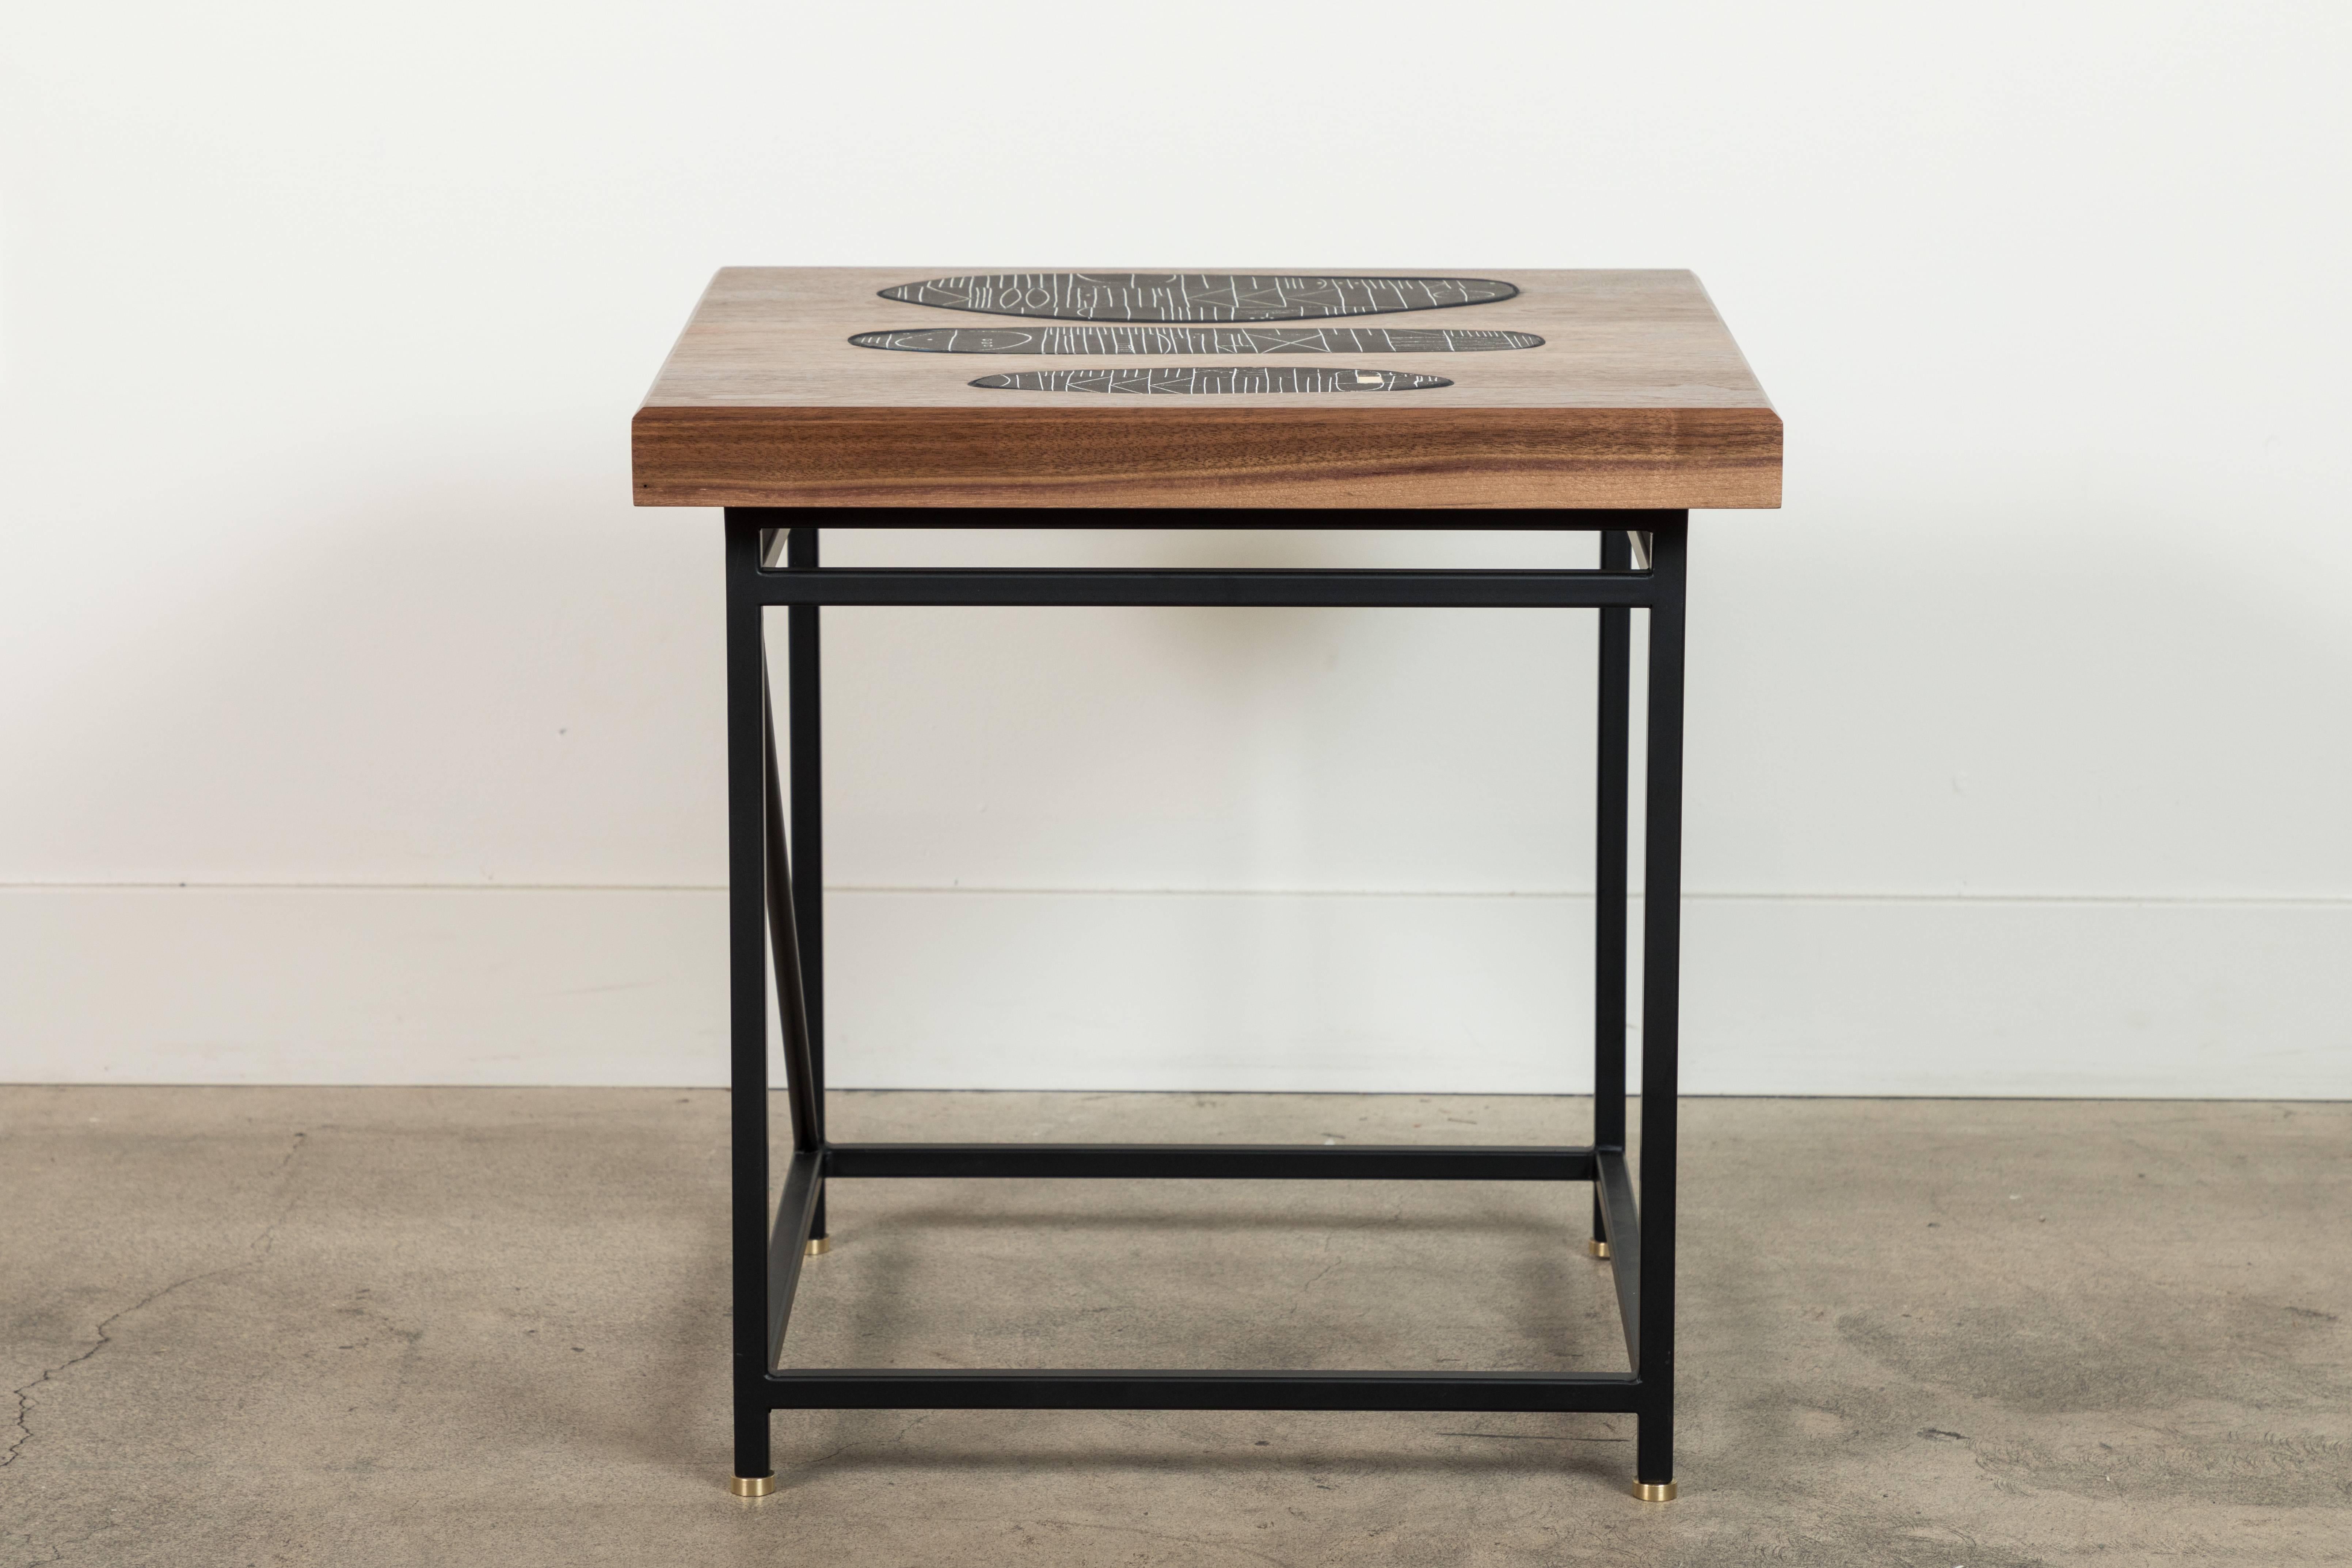 Solid walnut and ceramic side table by Heather Rosenman for Collabs in clay.